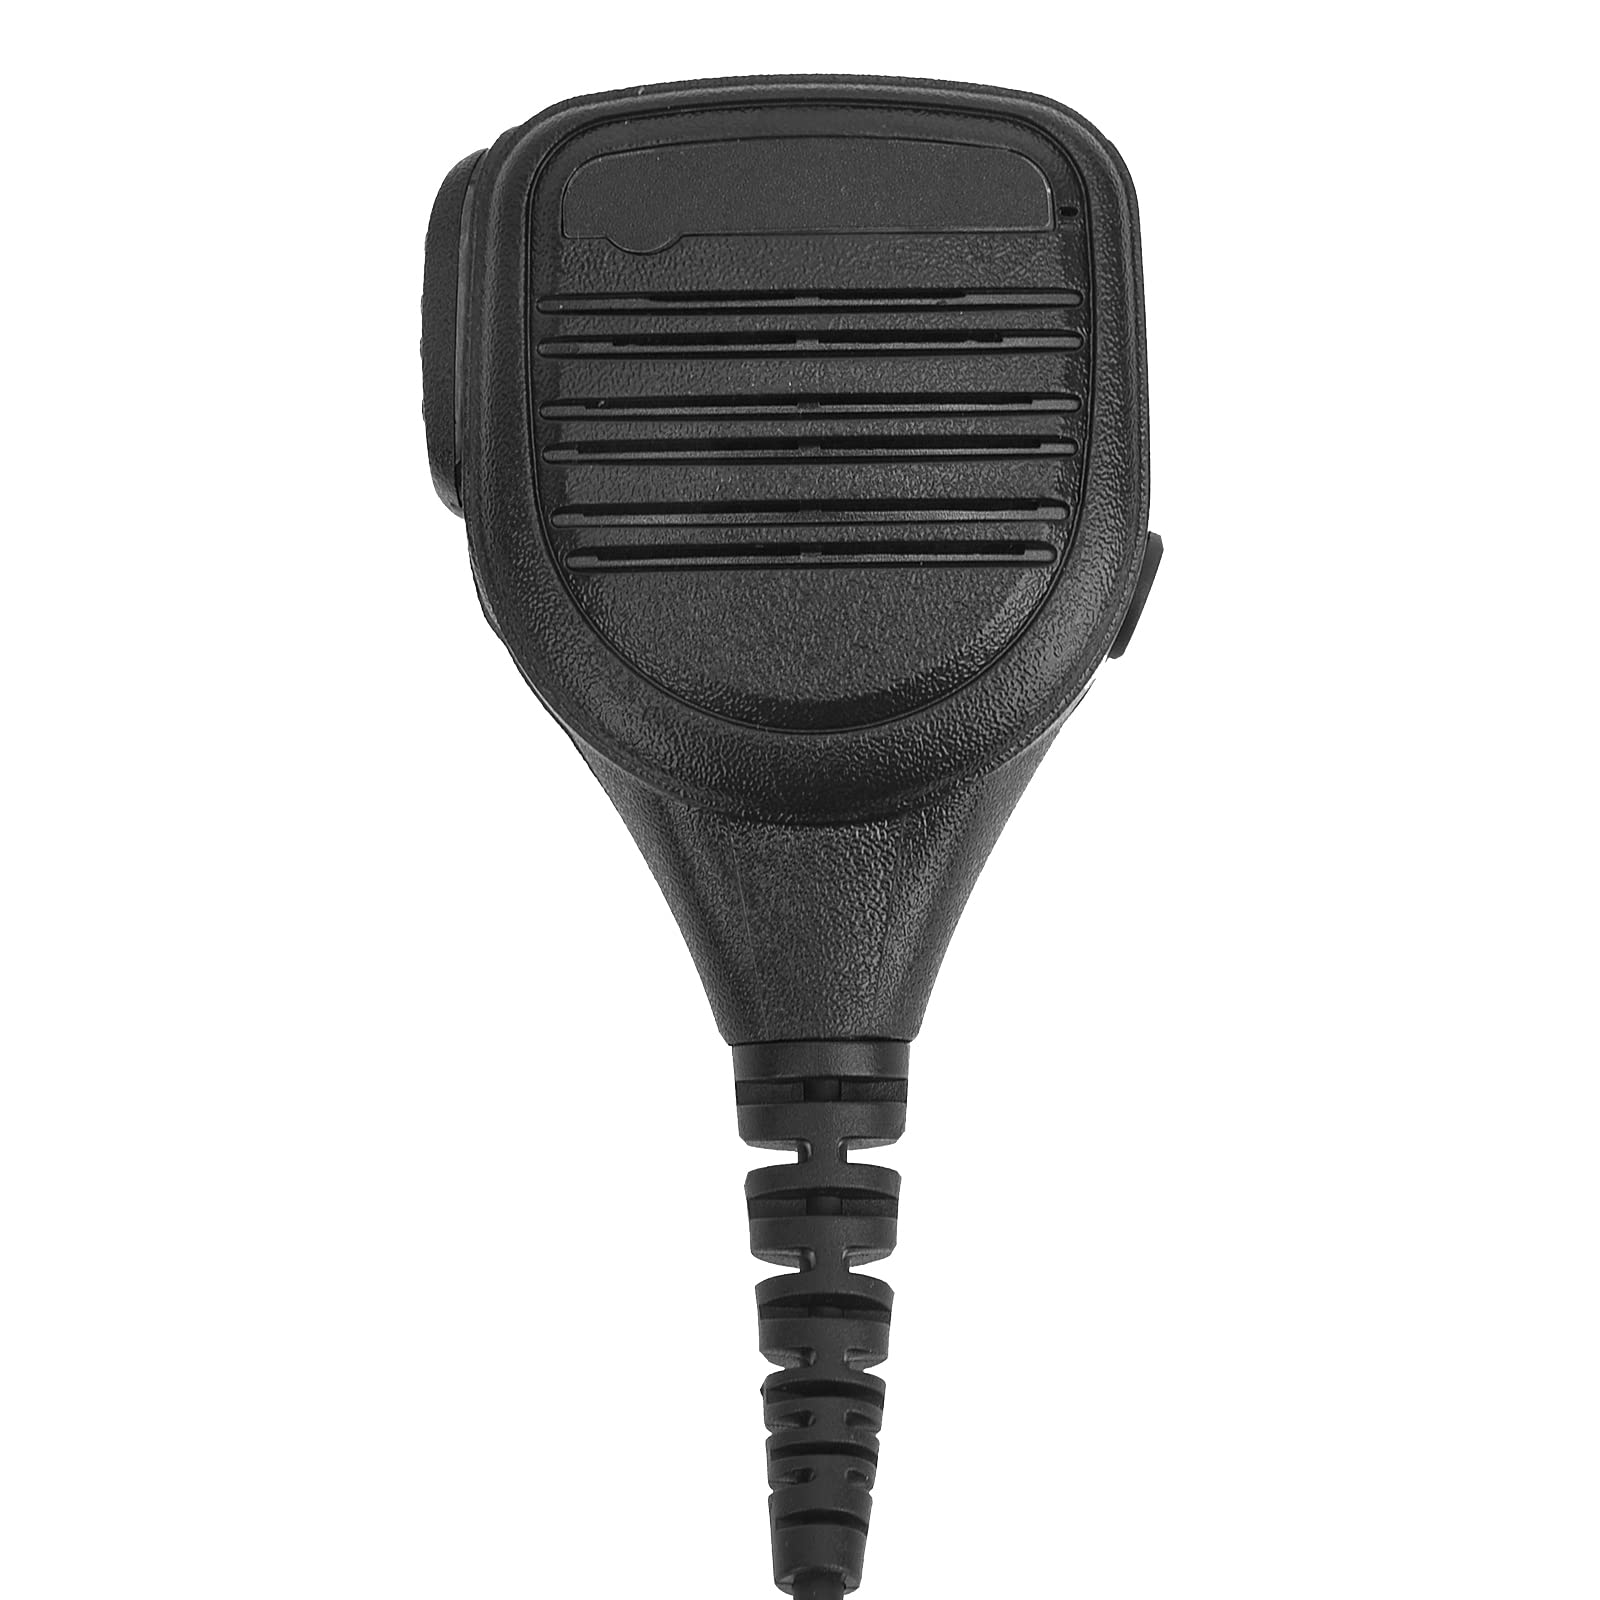 Pdflie Walkie Talkie Speaker Microphone Hand Shoulder Mic with 3.5mm Audio Jack Reinforced Cable for Hytera Two Way Radio pd602i pd682i pd662i hp602 hp682 bd519 bd6302 pd680 x1pi x1ei